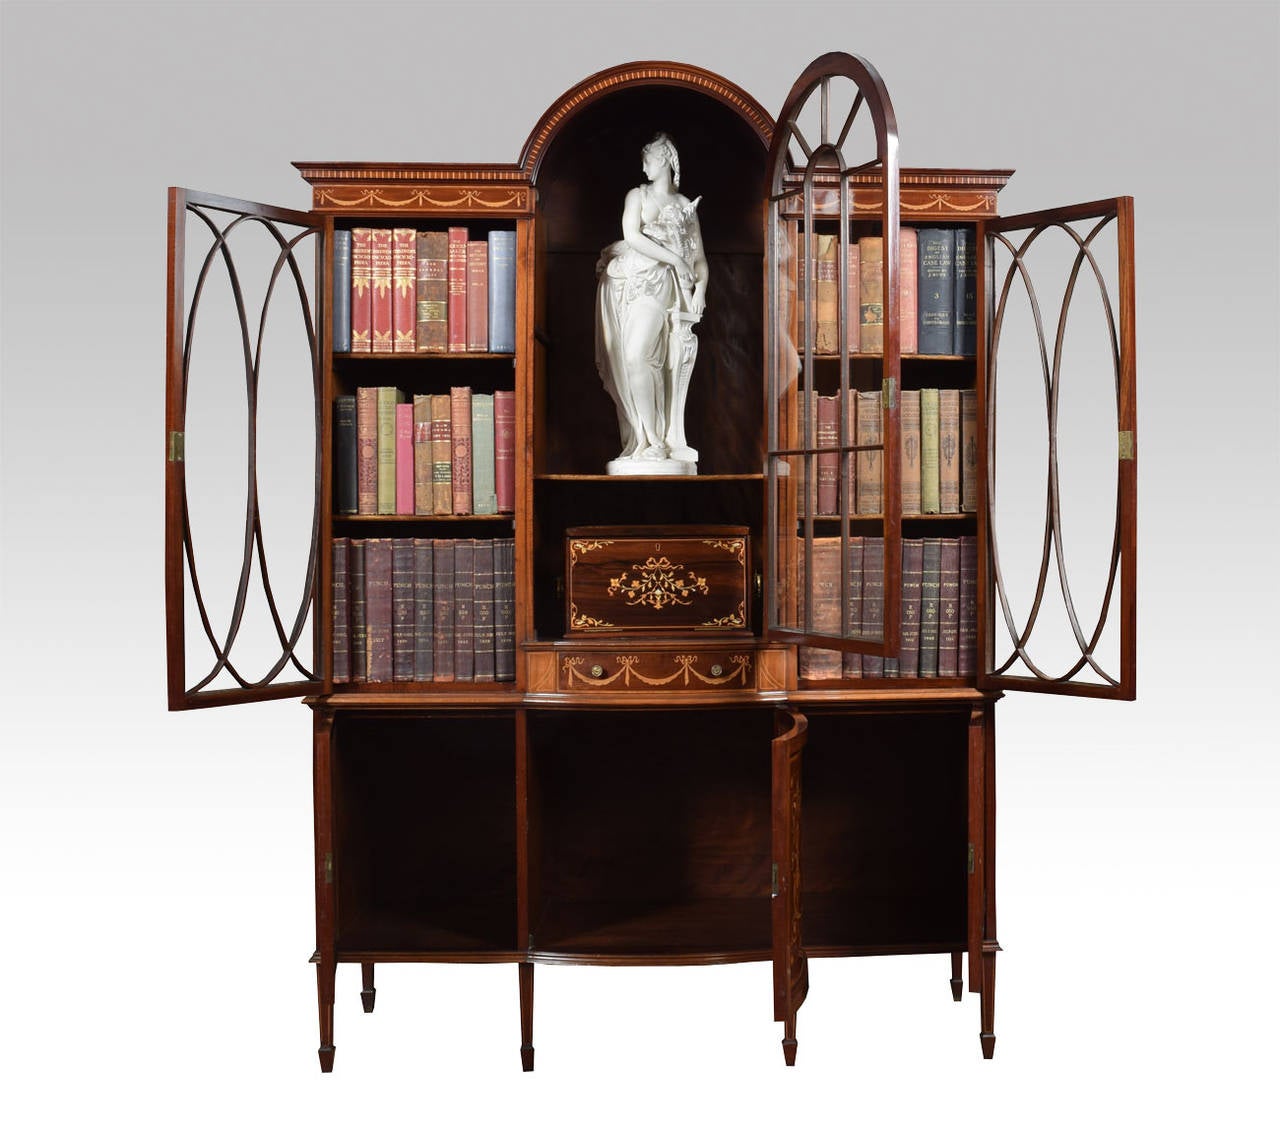 Late Victorian Late 19th Century Sheraton Revival Mahogany Inlaid Display Cabinet Bookcase